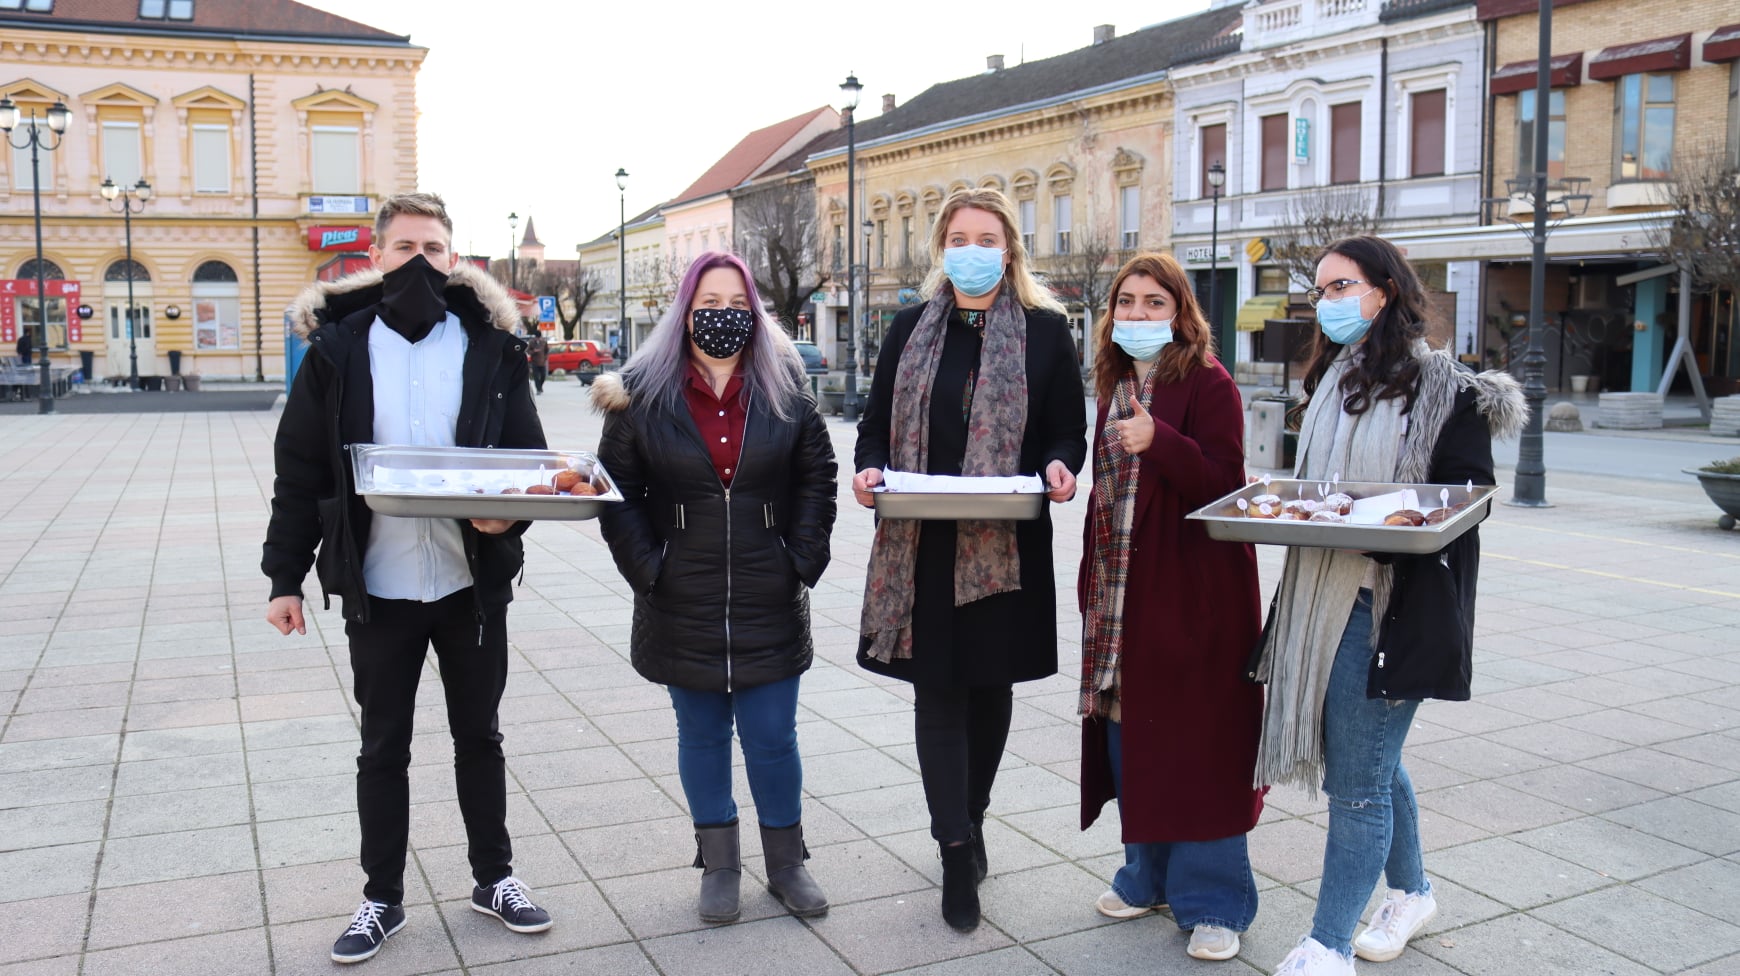 Seniors in Croatian town of Daruvar cheered up as 300 krafna dished out